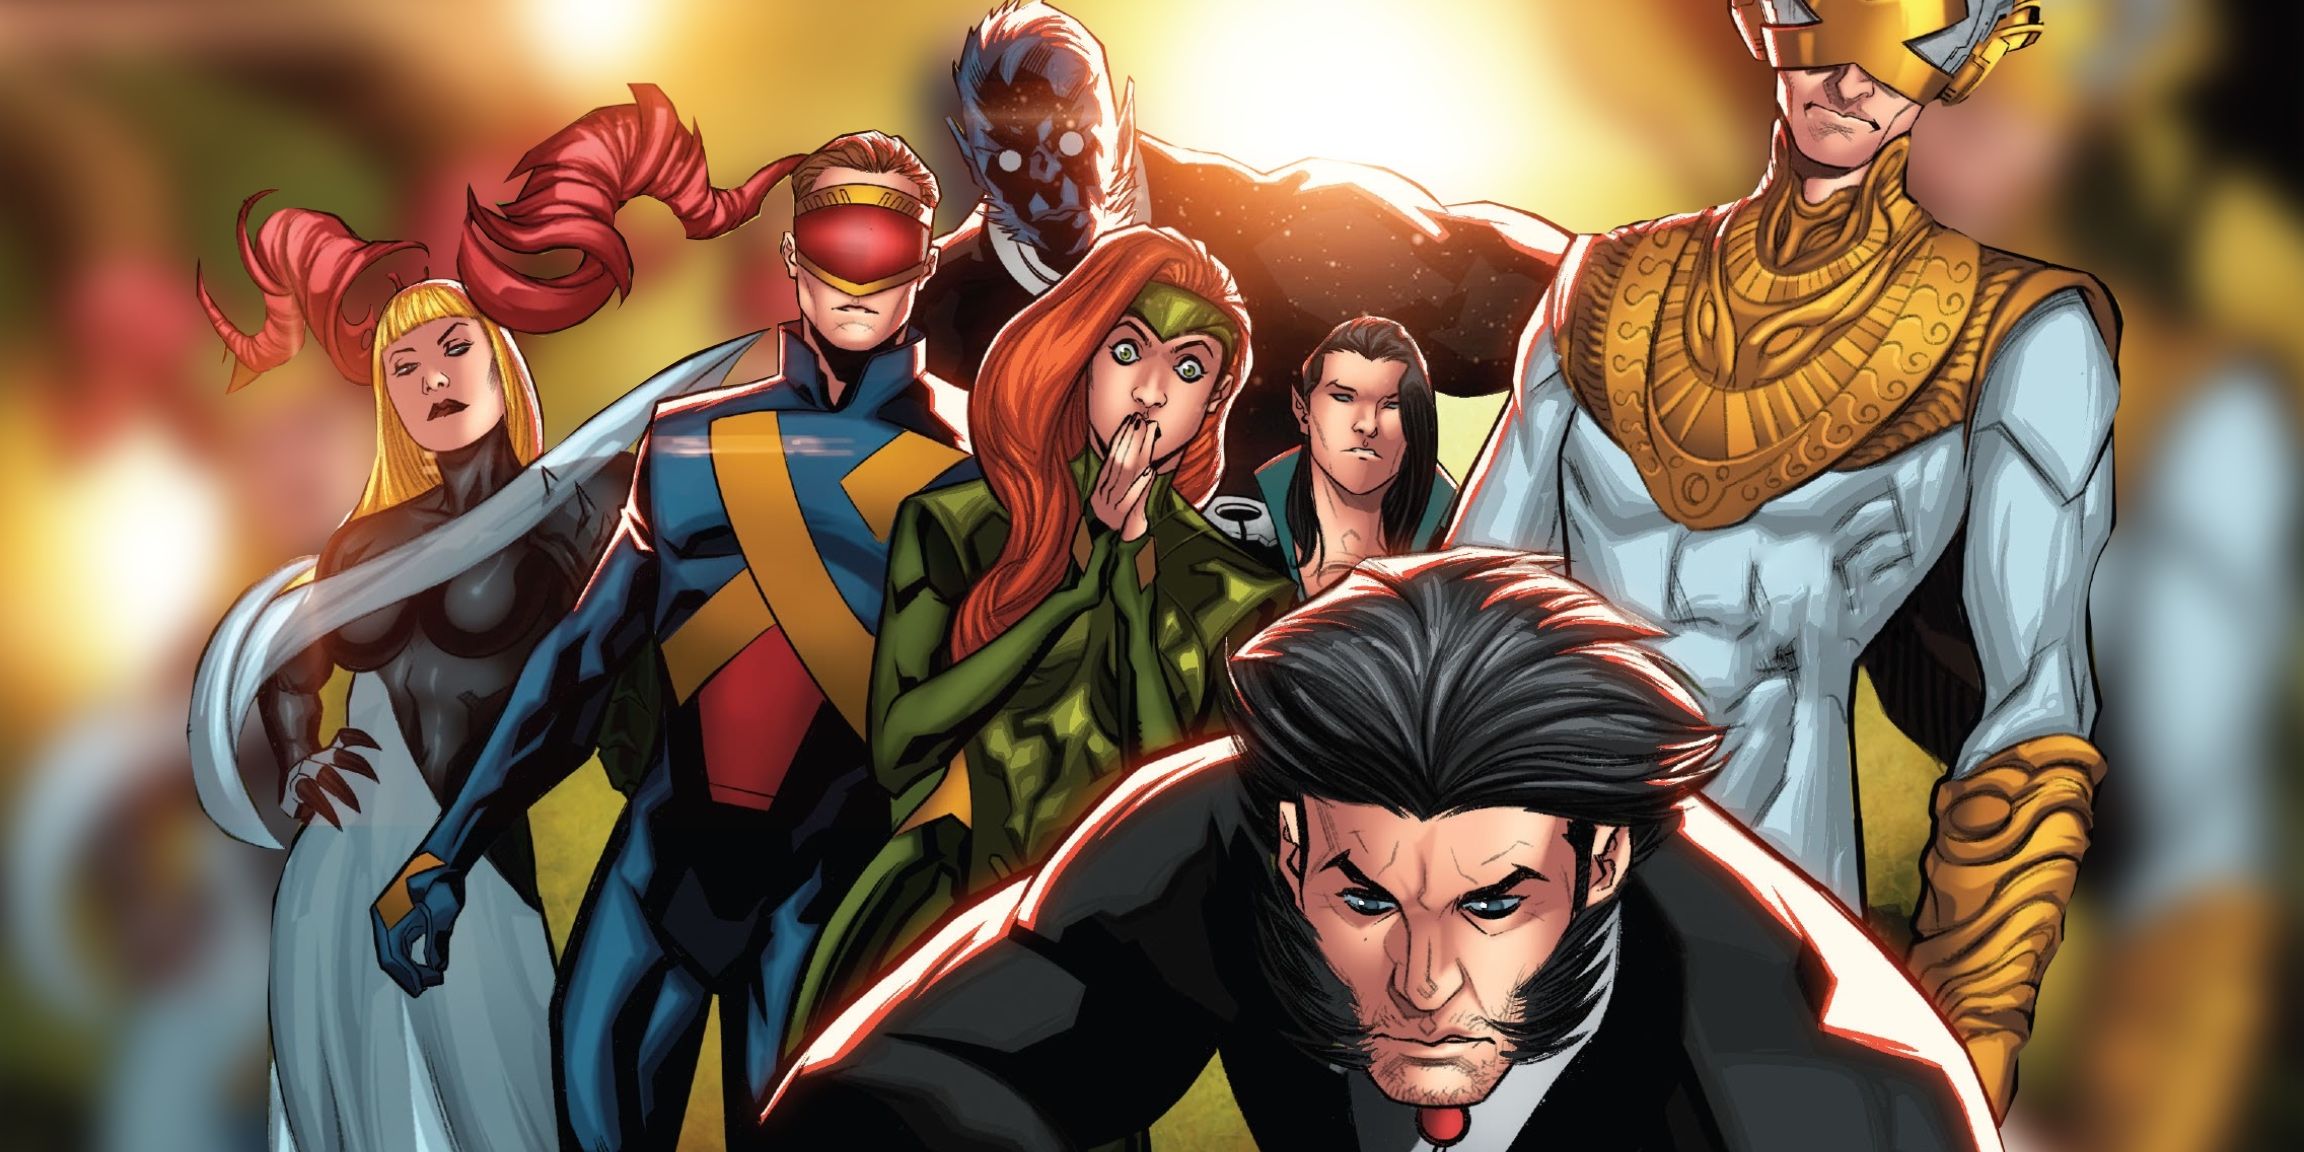 The X-Men gathered in Marvel comics